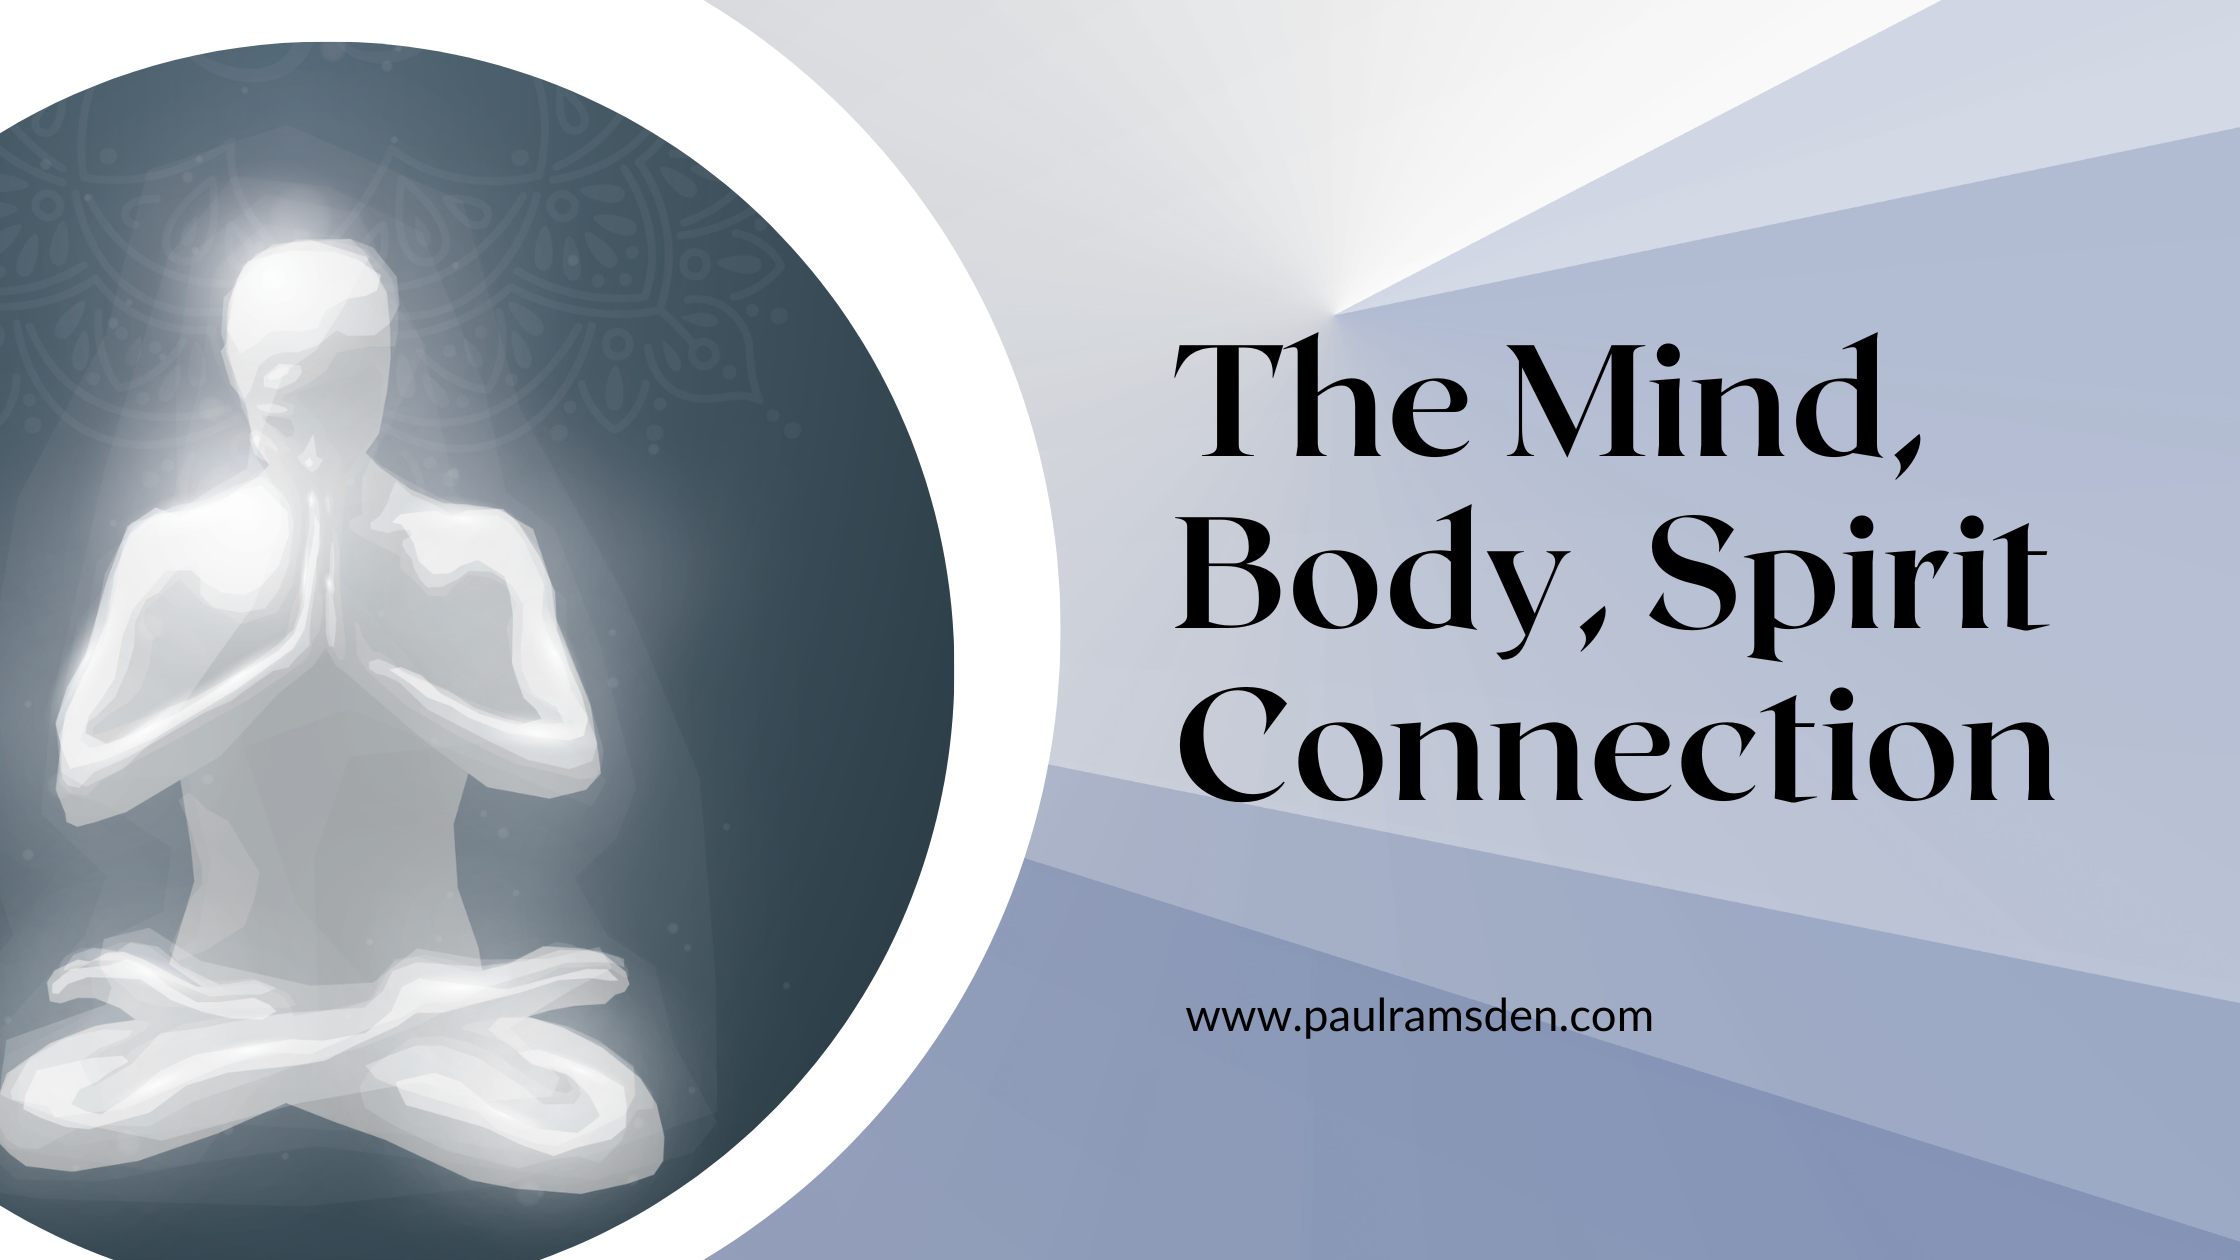 The Mind-Body-Soul-Spirit Connection